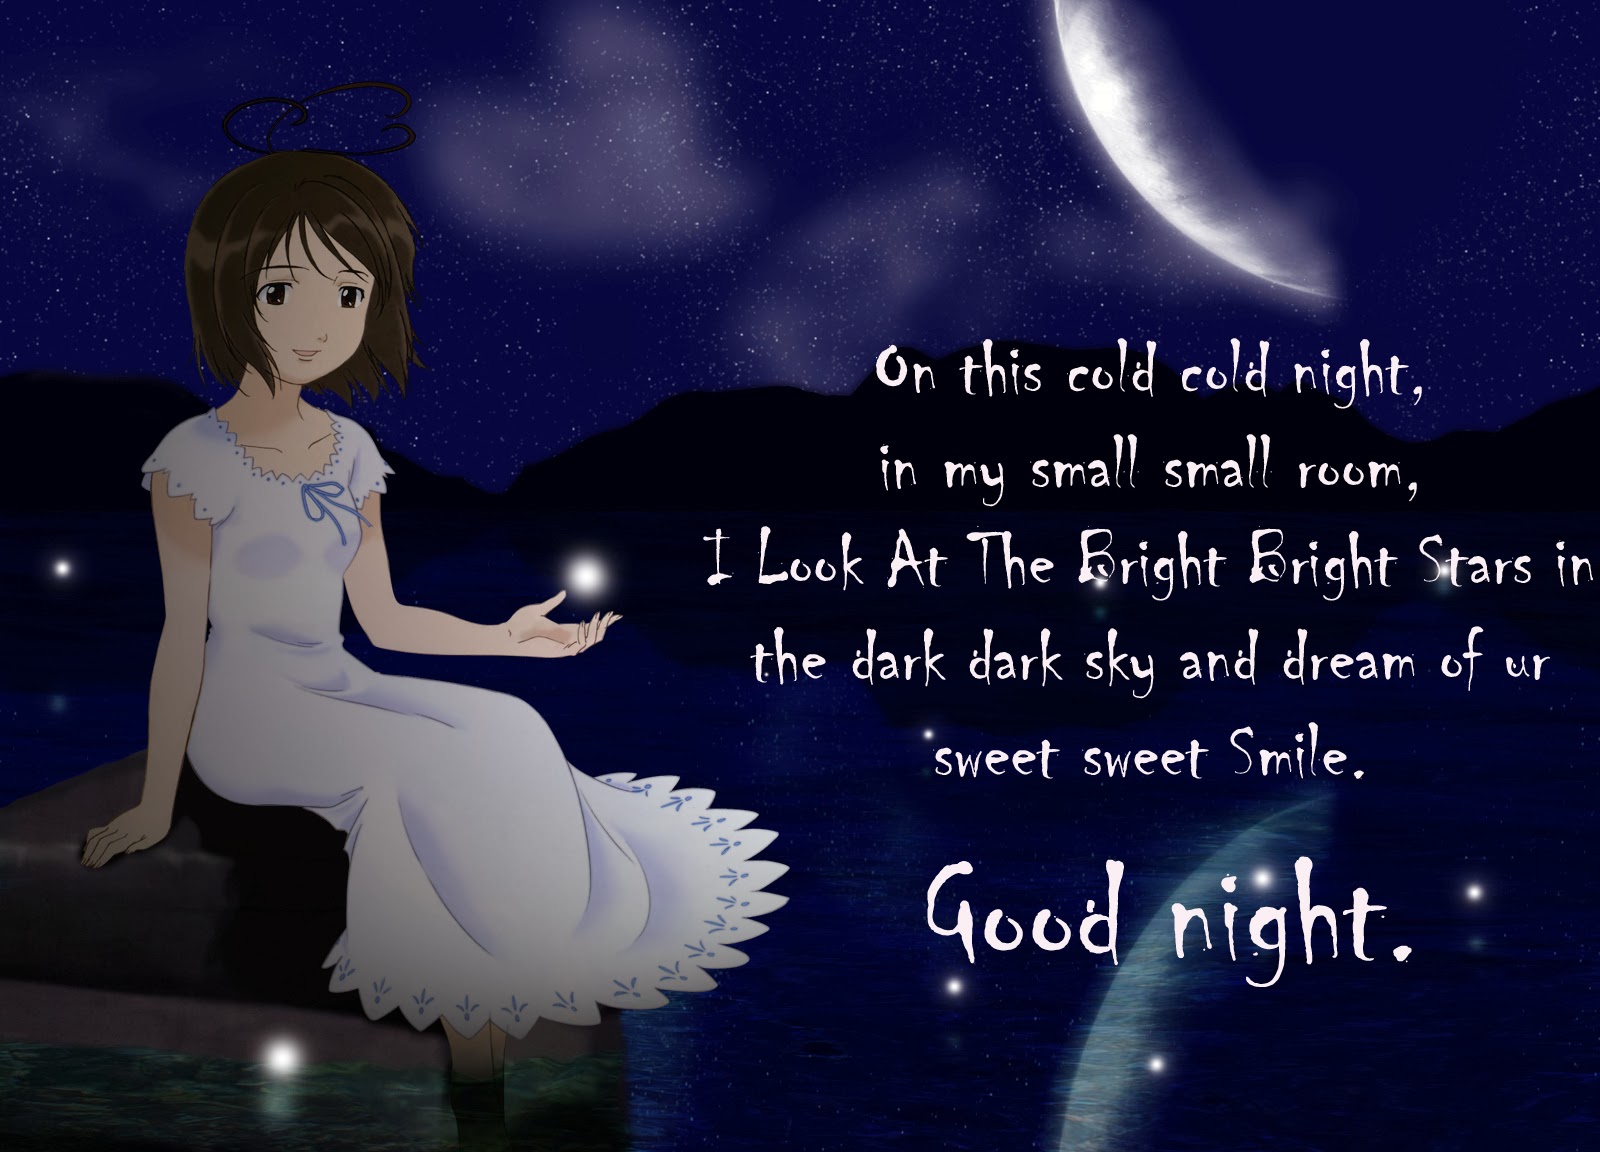 Today We Are Providing HD Wallpaper And Image Of Good Night Which